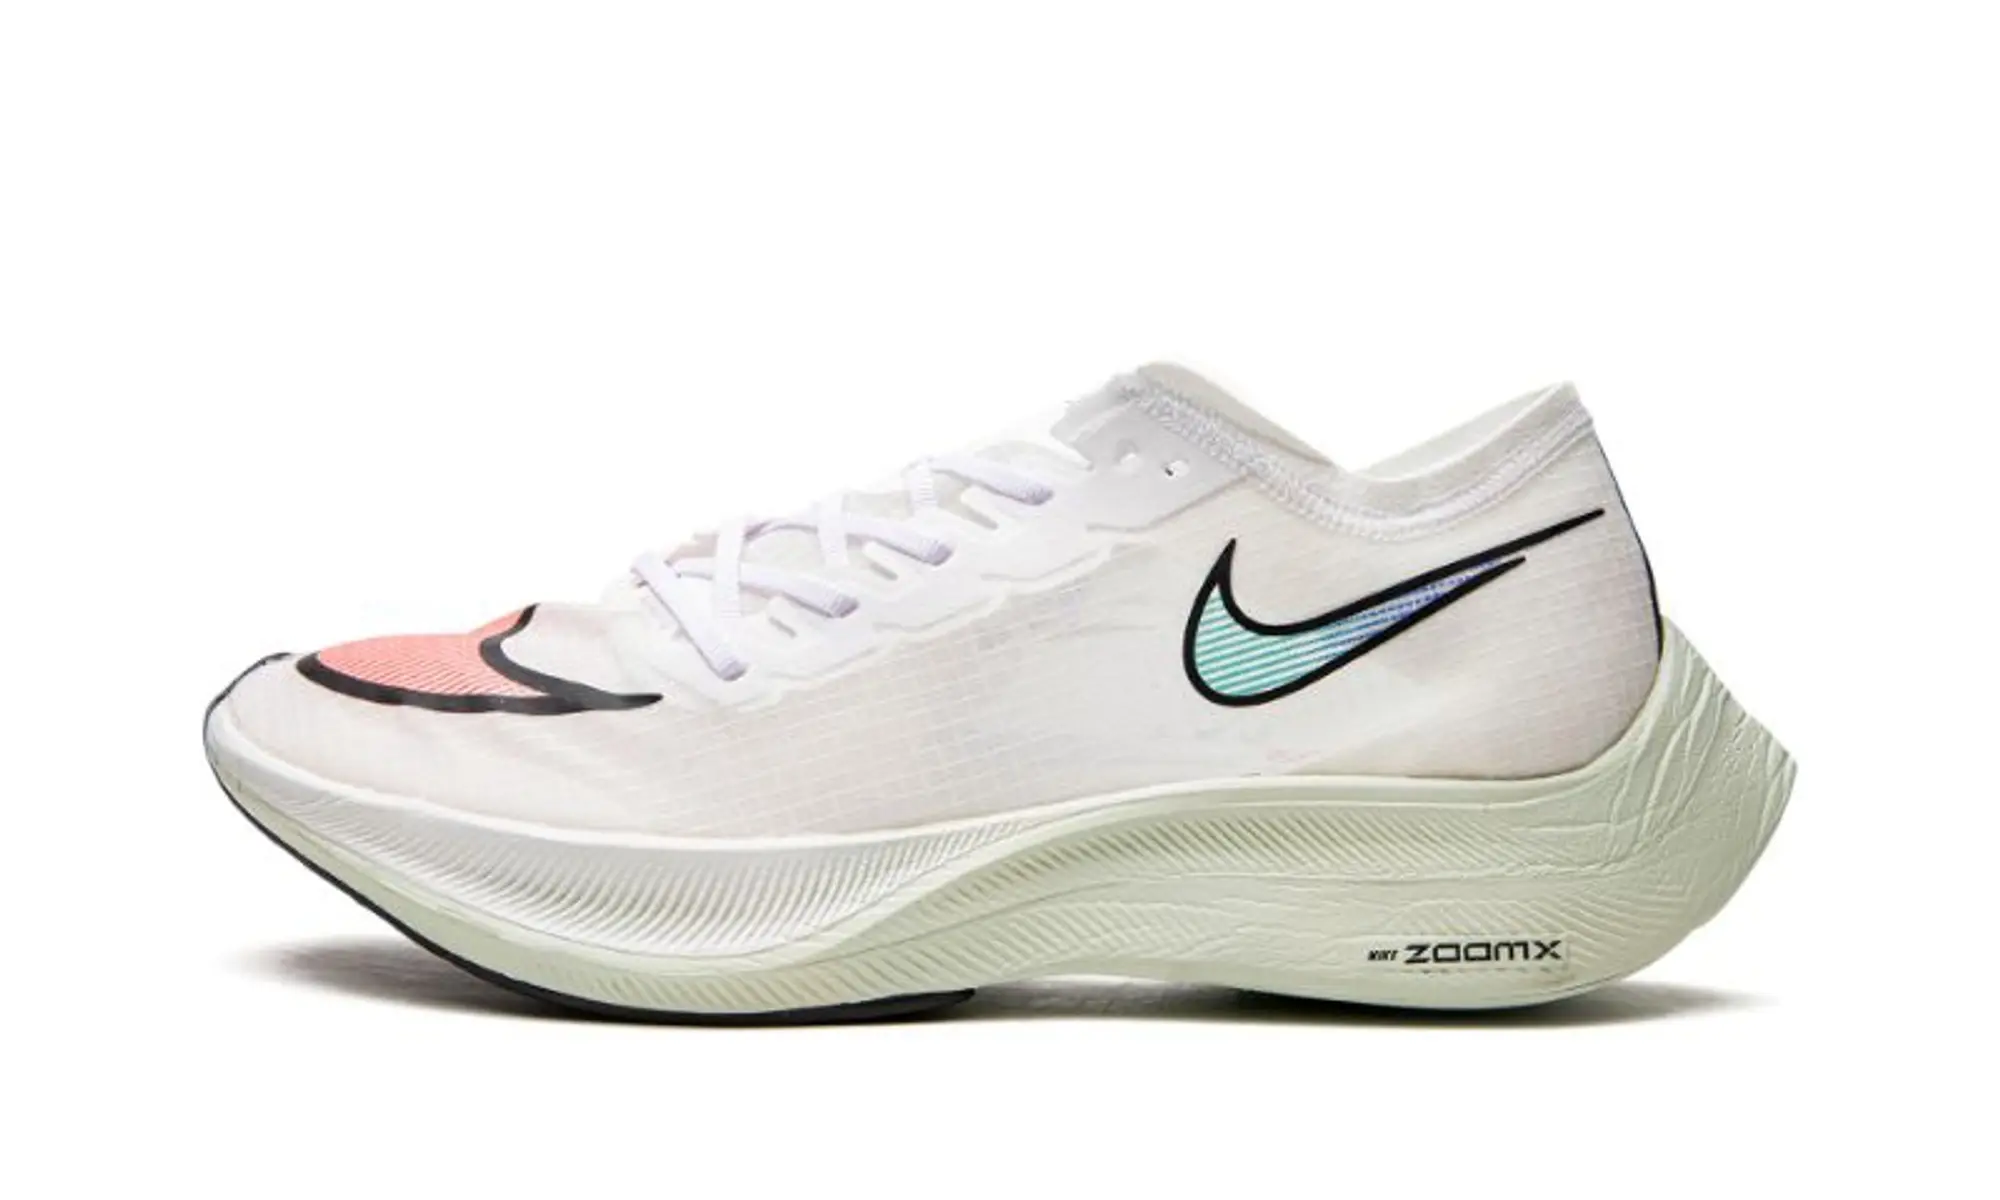 Nike ZoomX VaporFly Next% Shoes